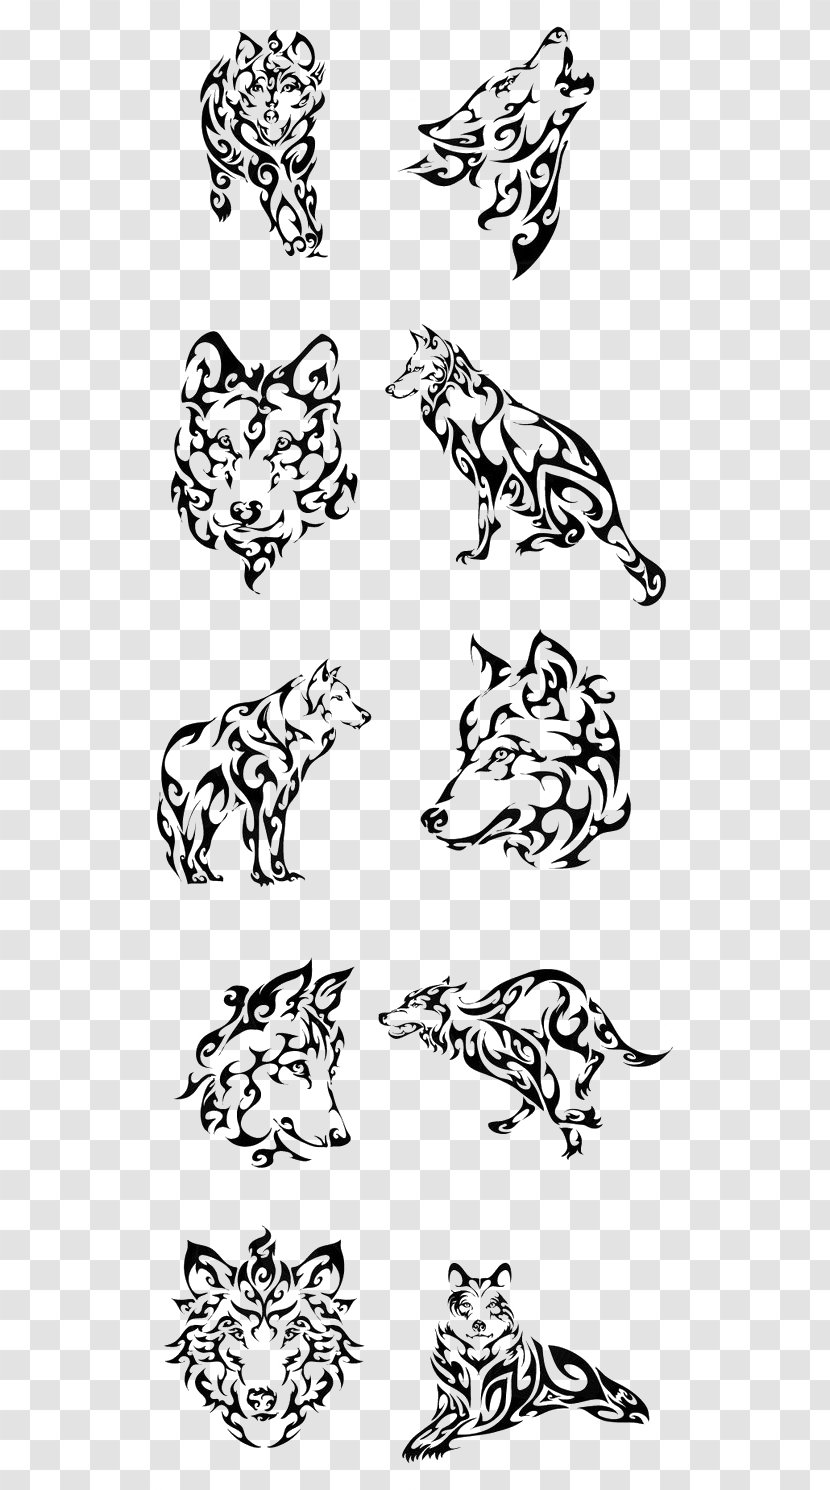 Comanche Tattoo Tribe Symbol Native Americans In The United States - Monochrome - Cartoon Wolf Transparent PNG